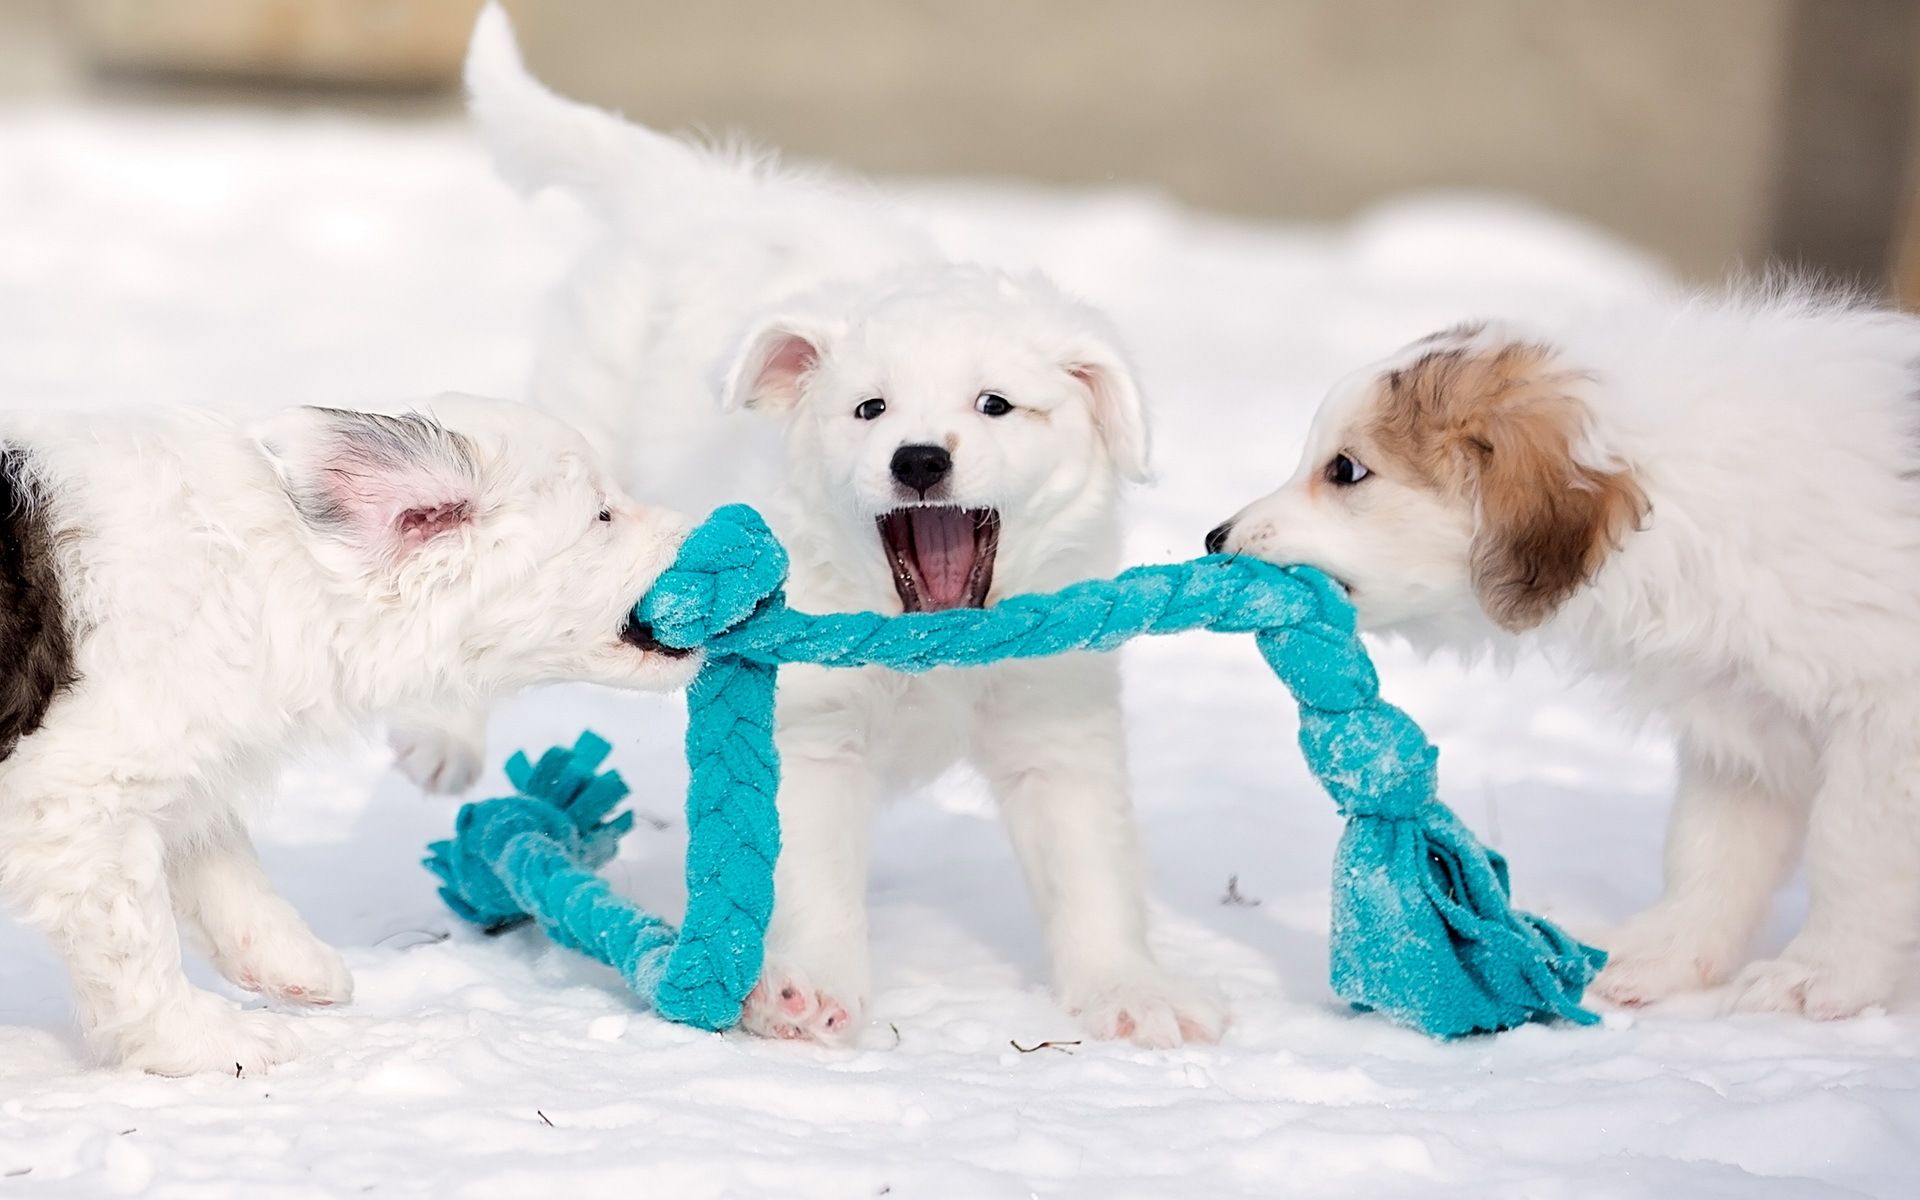 Fun Winter Activities For You and Your Dog